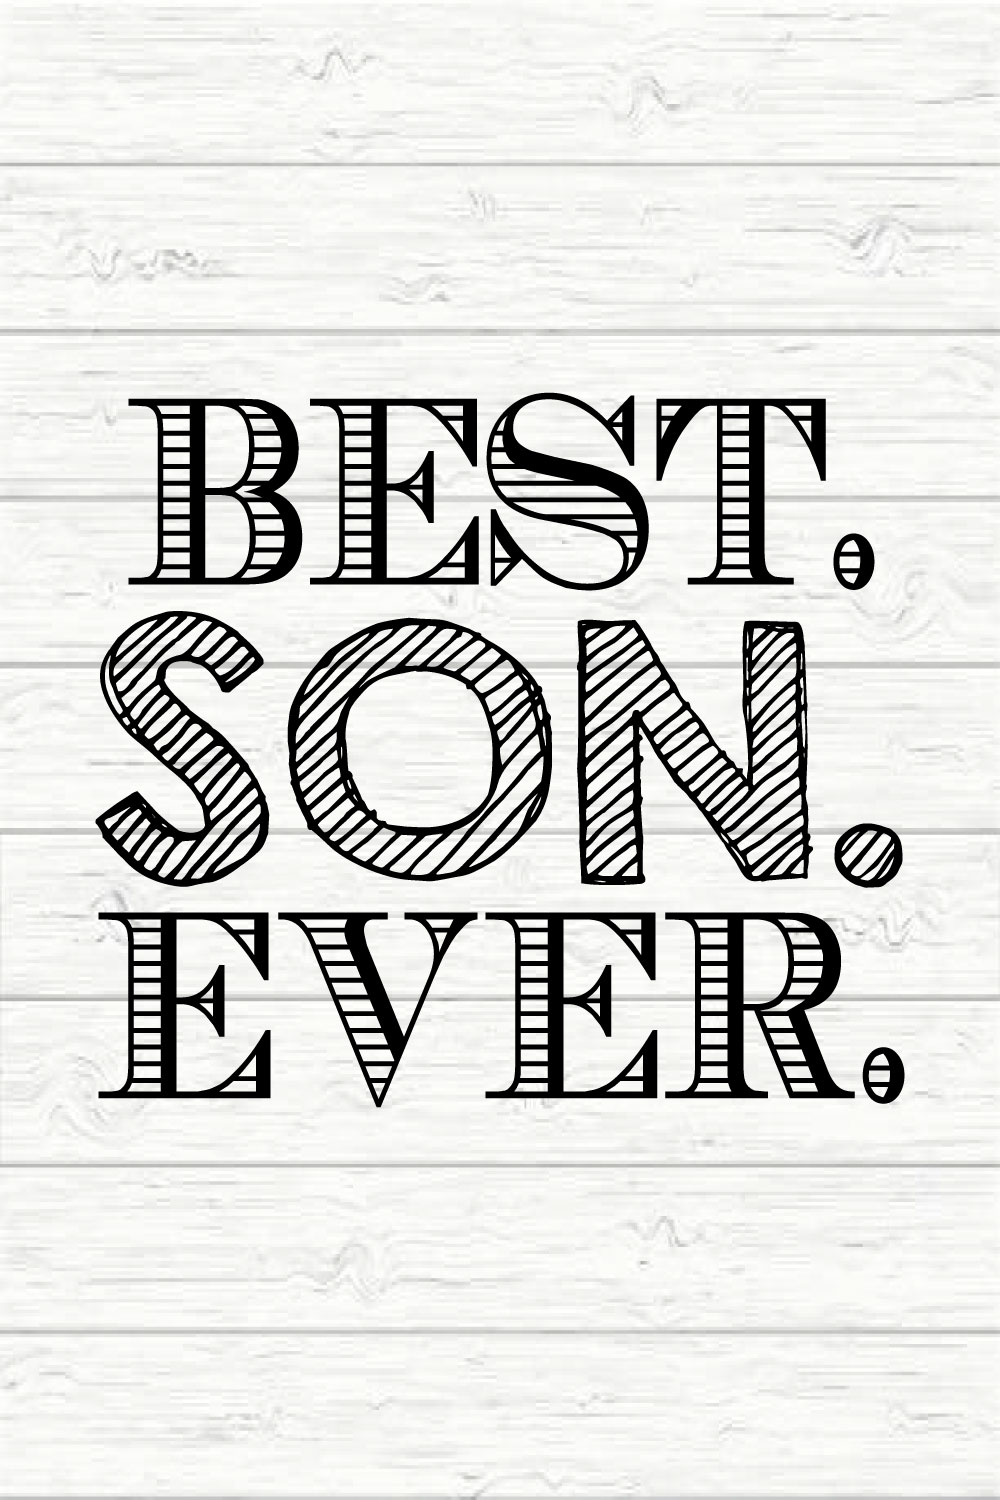 Best son ever pinterest preview image.